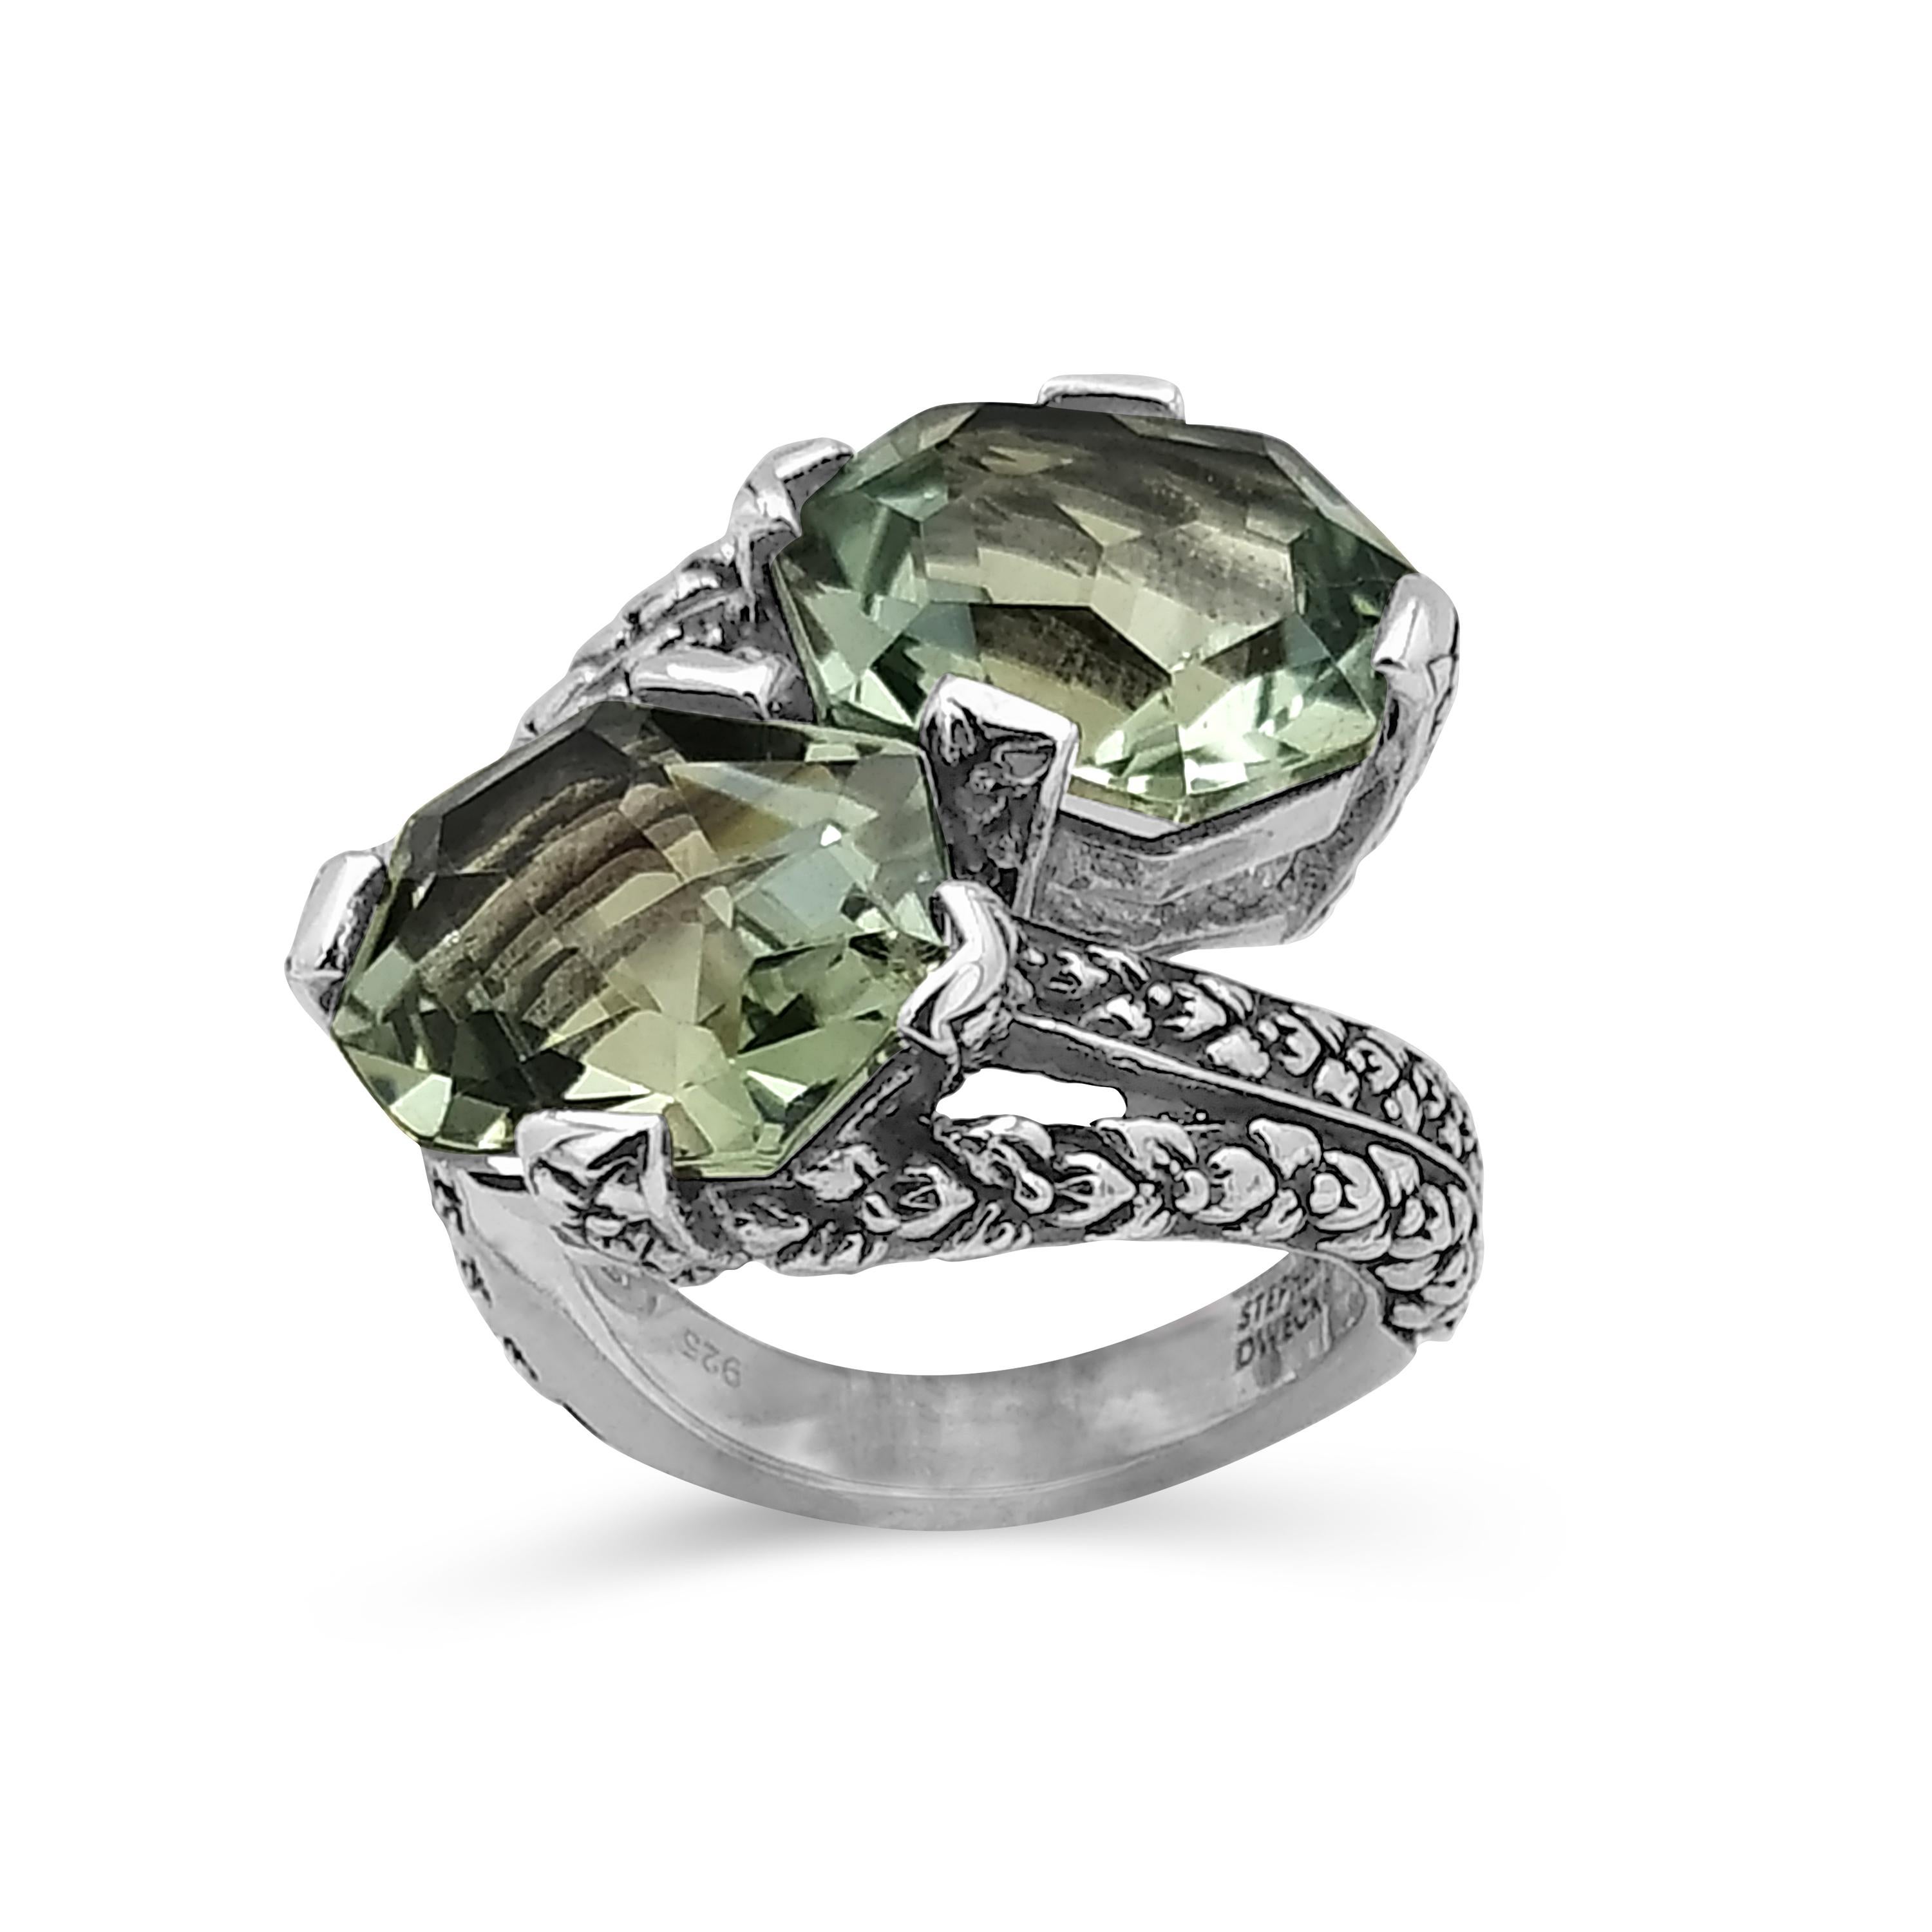 Emerald Cut Double Stone Green Amethyst Ring with Engraved Sterling Silver